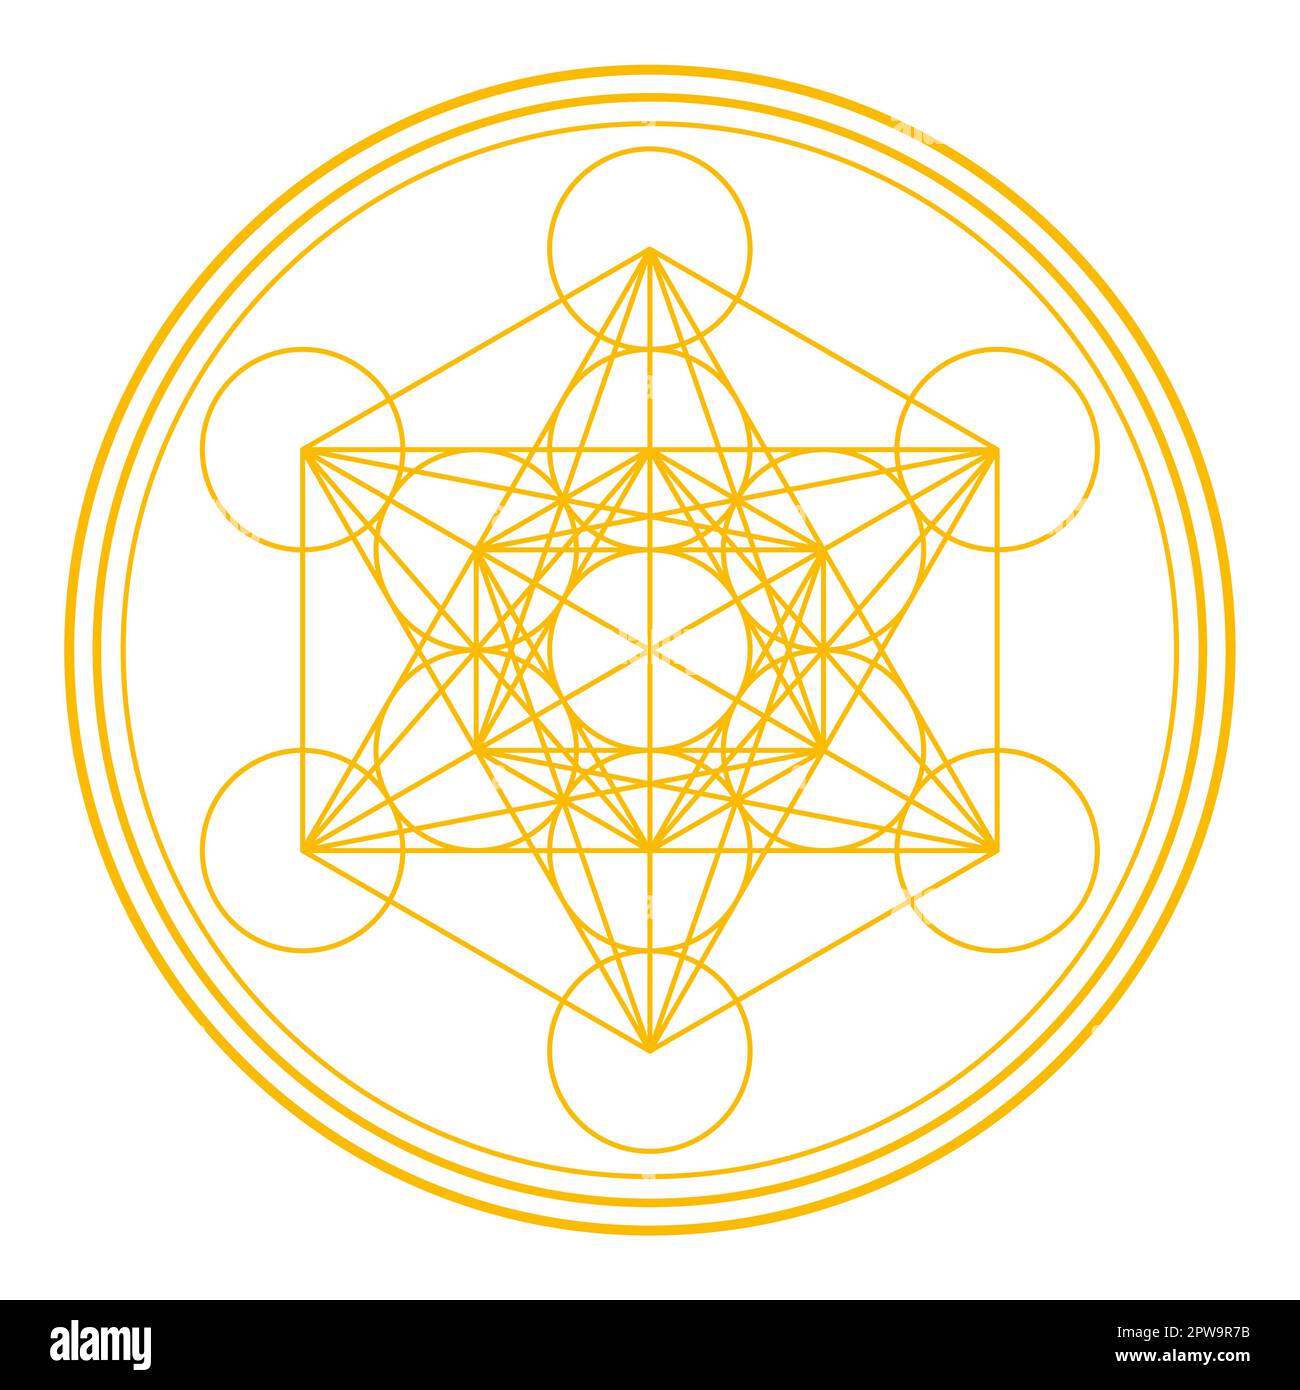 Golden Metatrons Cube, mystical symbol, derived from the Flower of Life Stock Vector